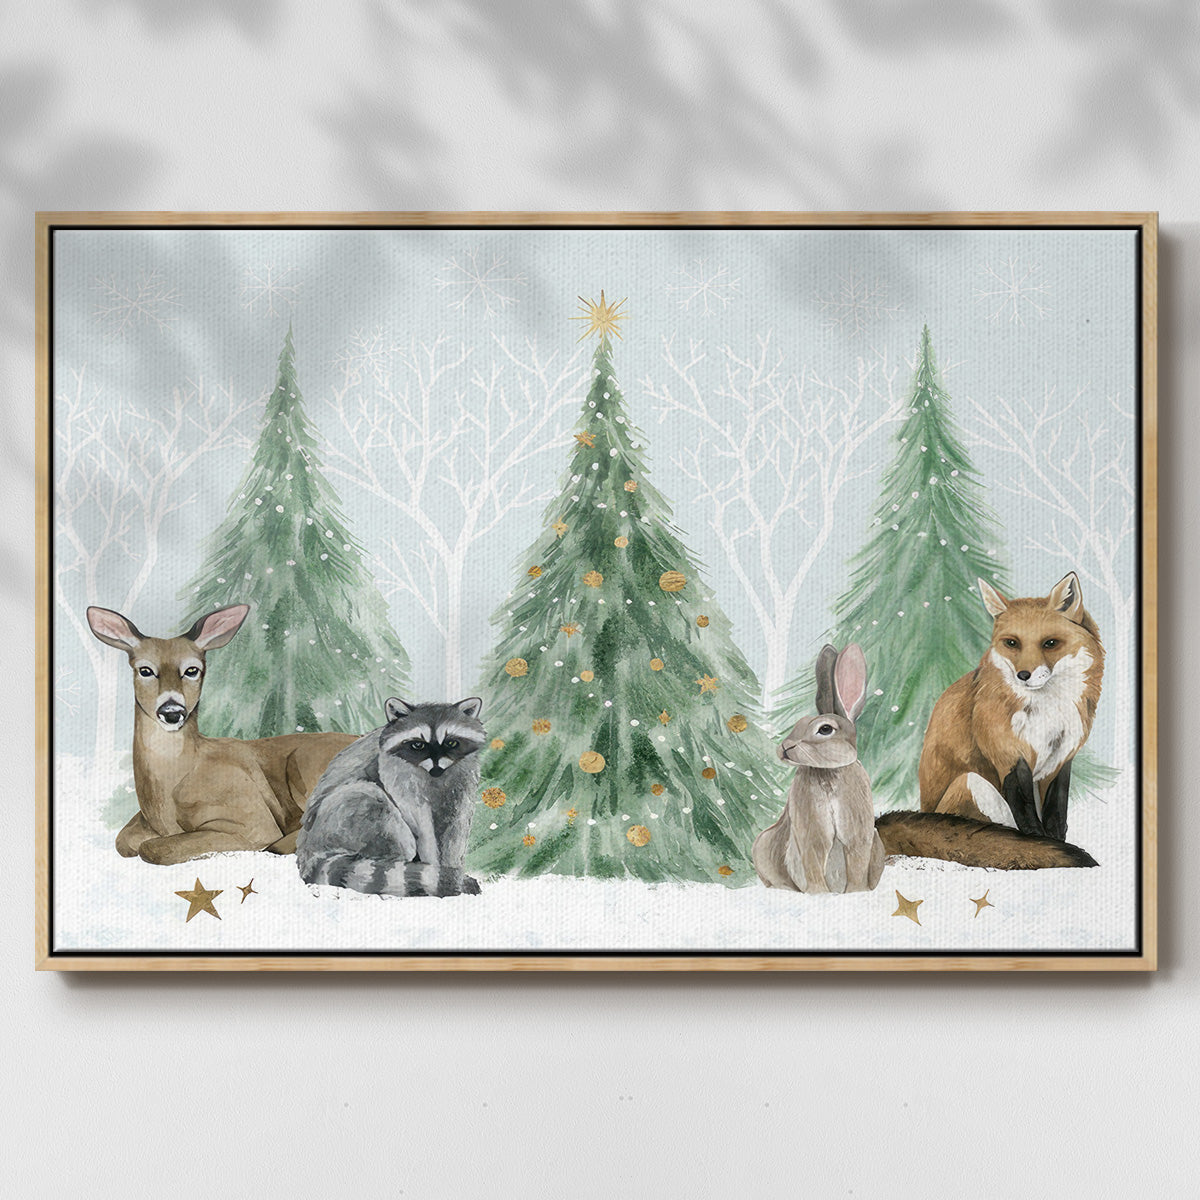 Christmas in the Forest Collection A - Framed Gallery Wrapped Canvas in Floating Frame